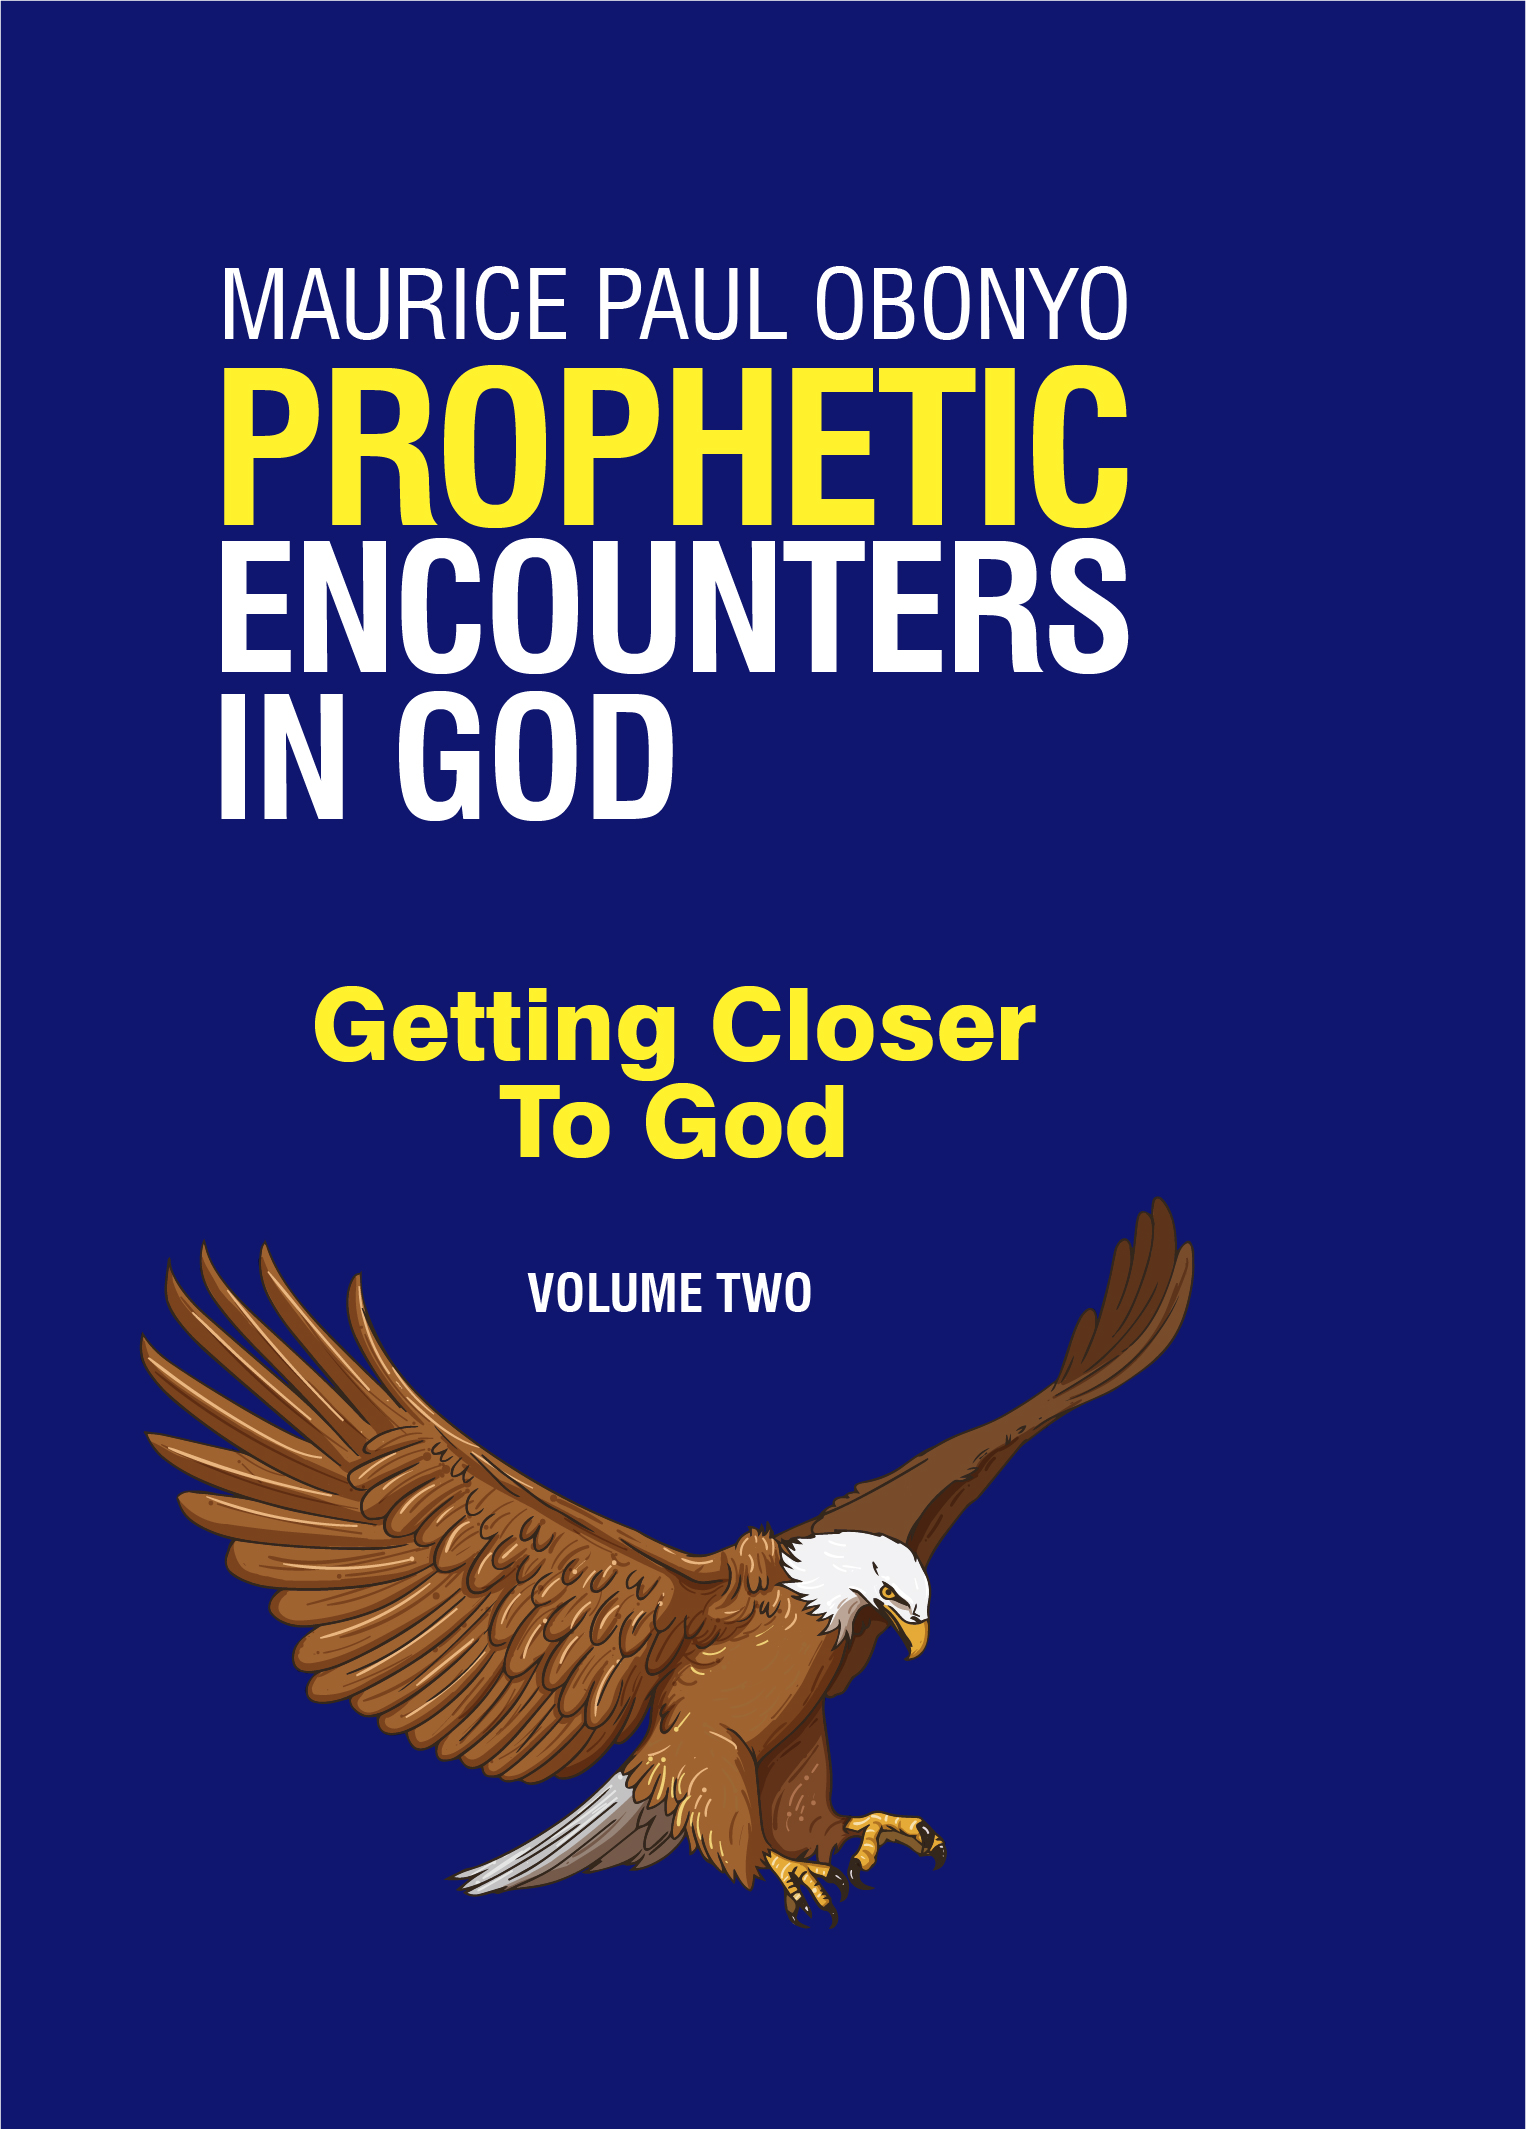 FREE: Prophetic Encounters In God: Getting Closer To God by Maurice Paul Obonyo